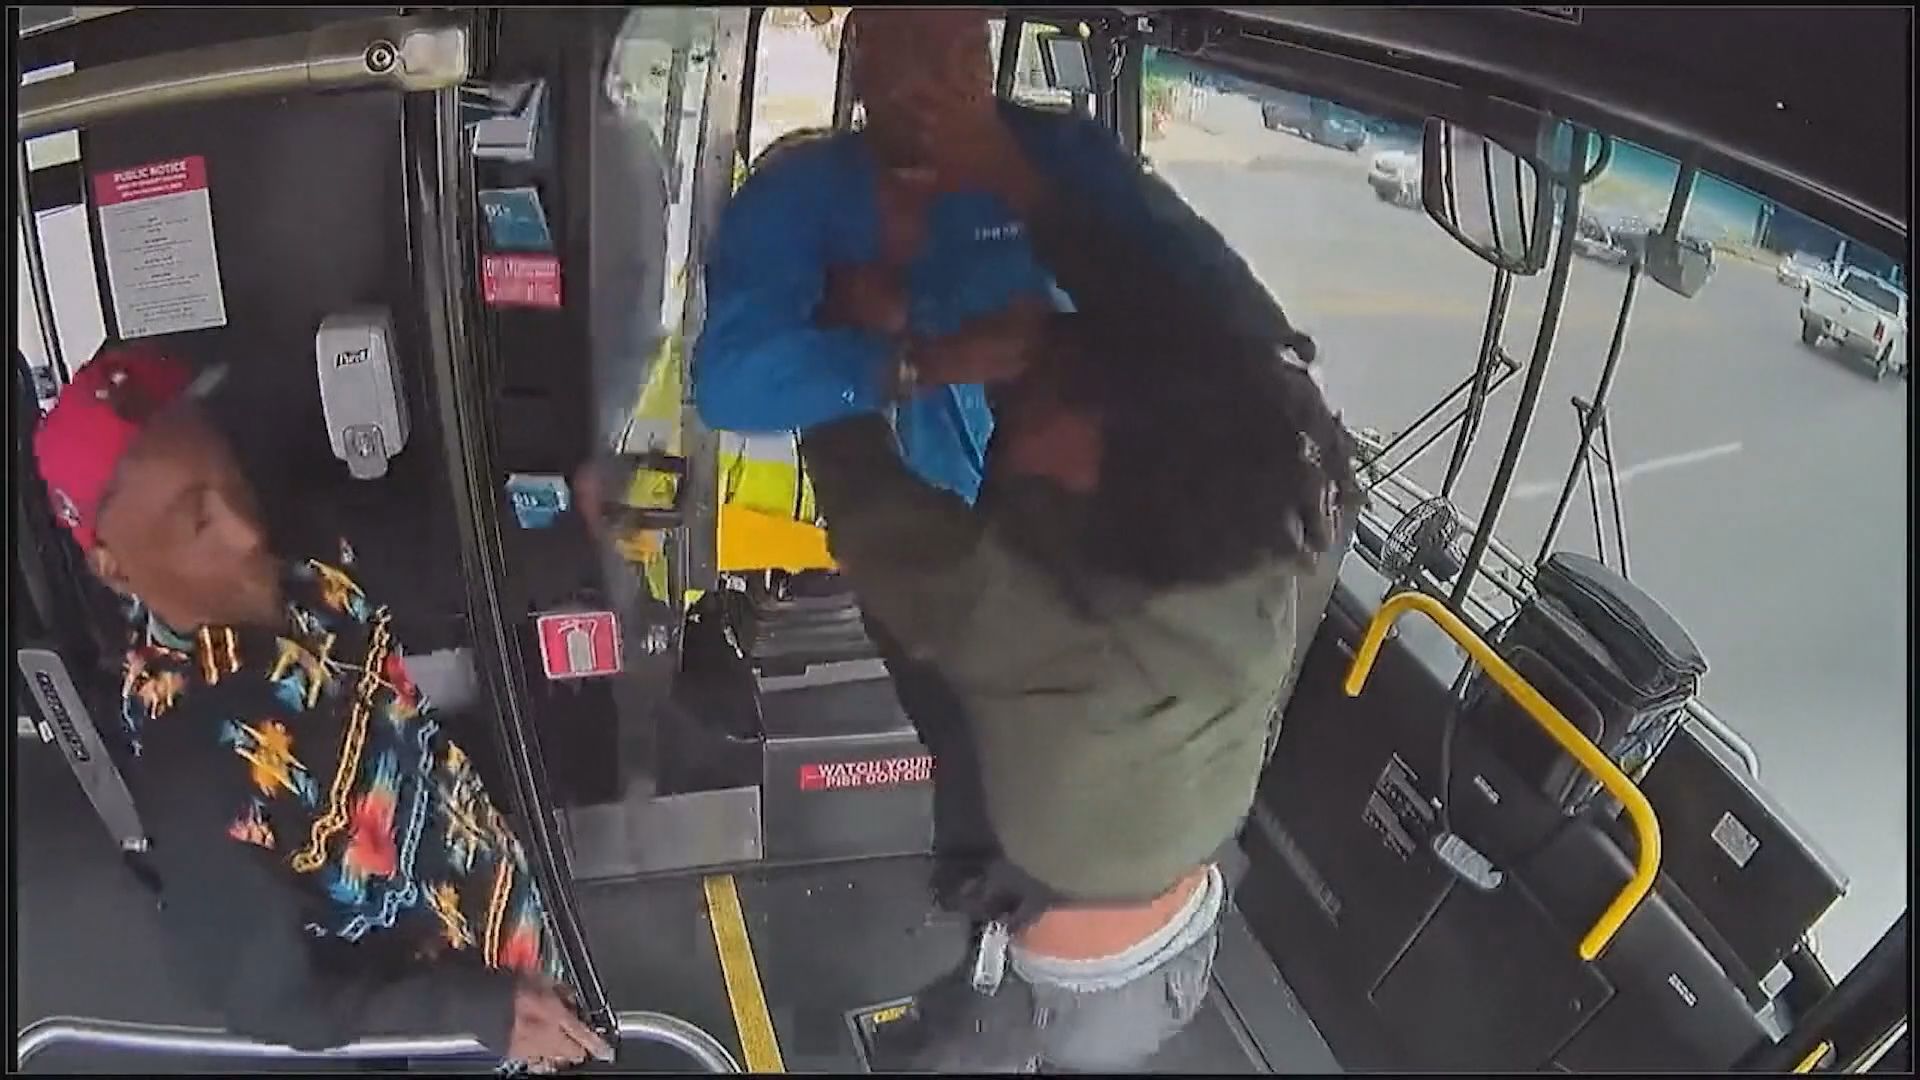 Security camera video has been released showing an angry bus rider in Oklahoma City, Oklahoma attacking the bus driver, before the bus crashes into a business.